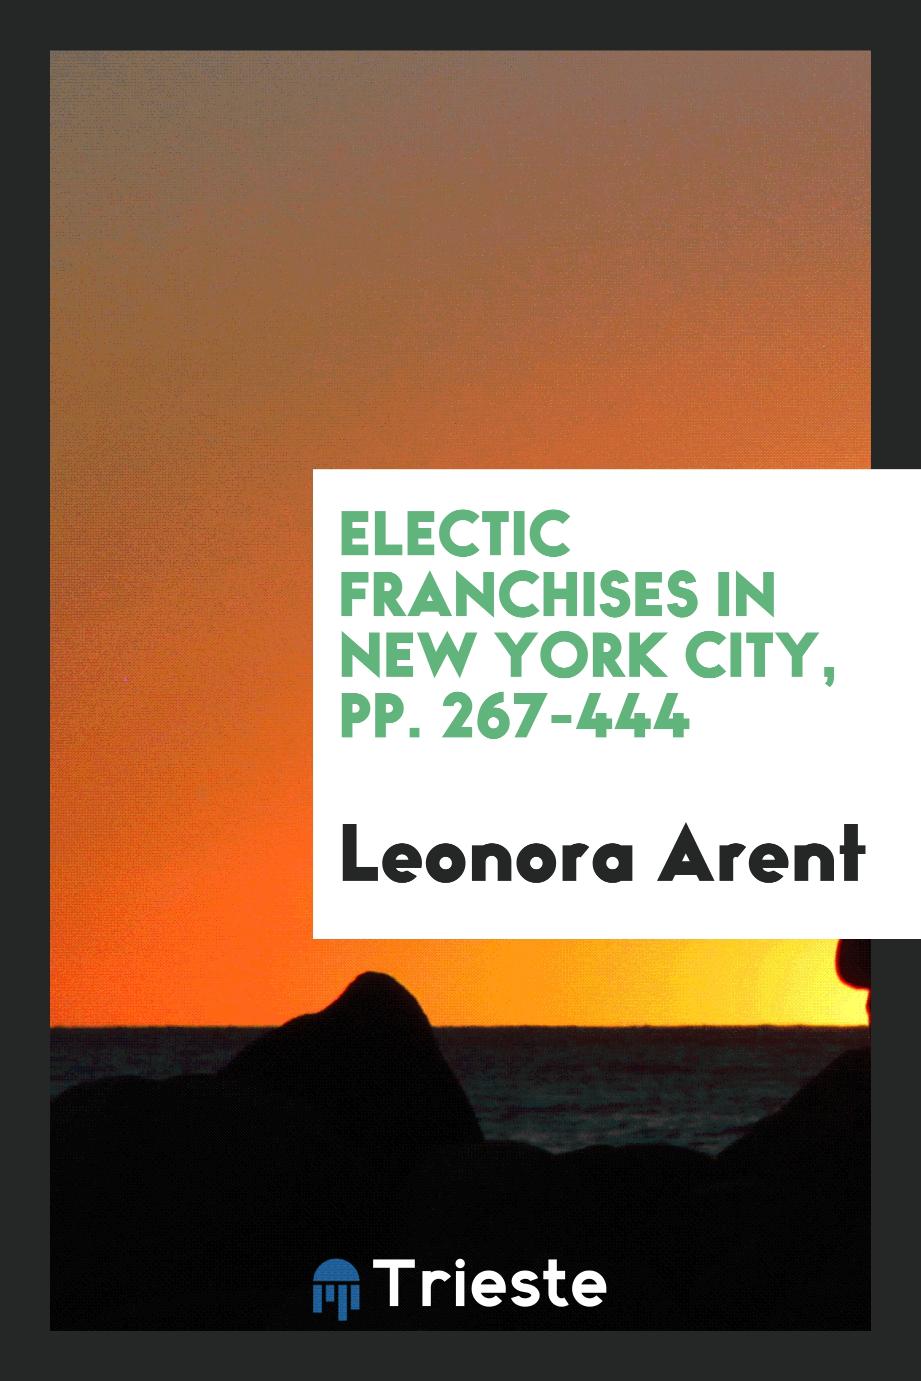 Electic Franchises in New York City, pp. 267-444